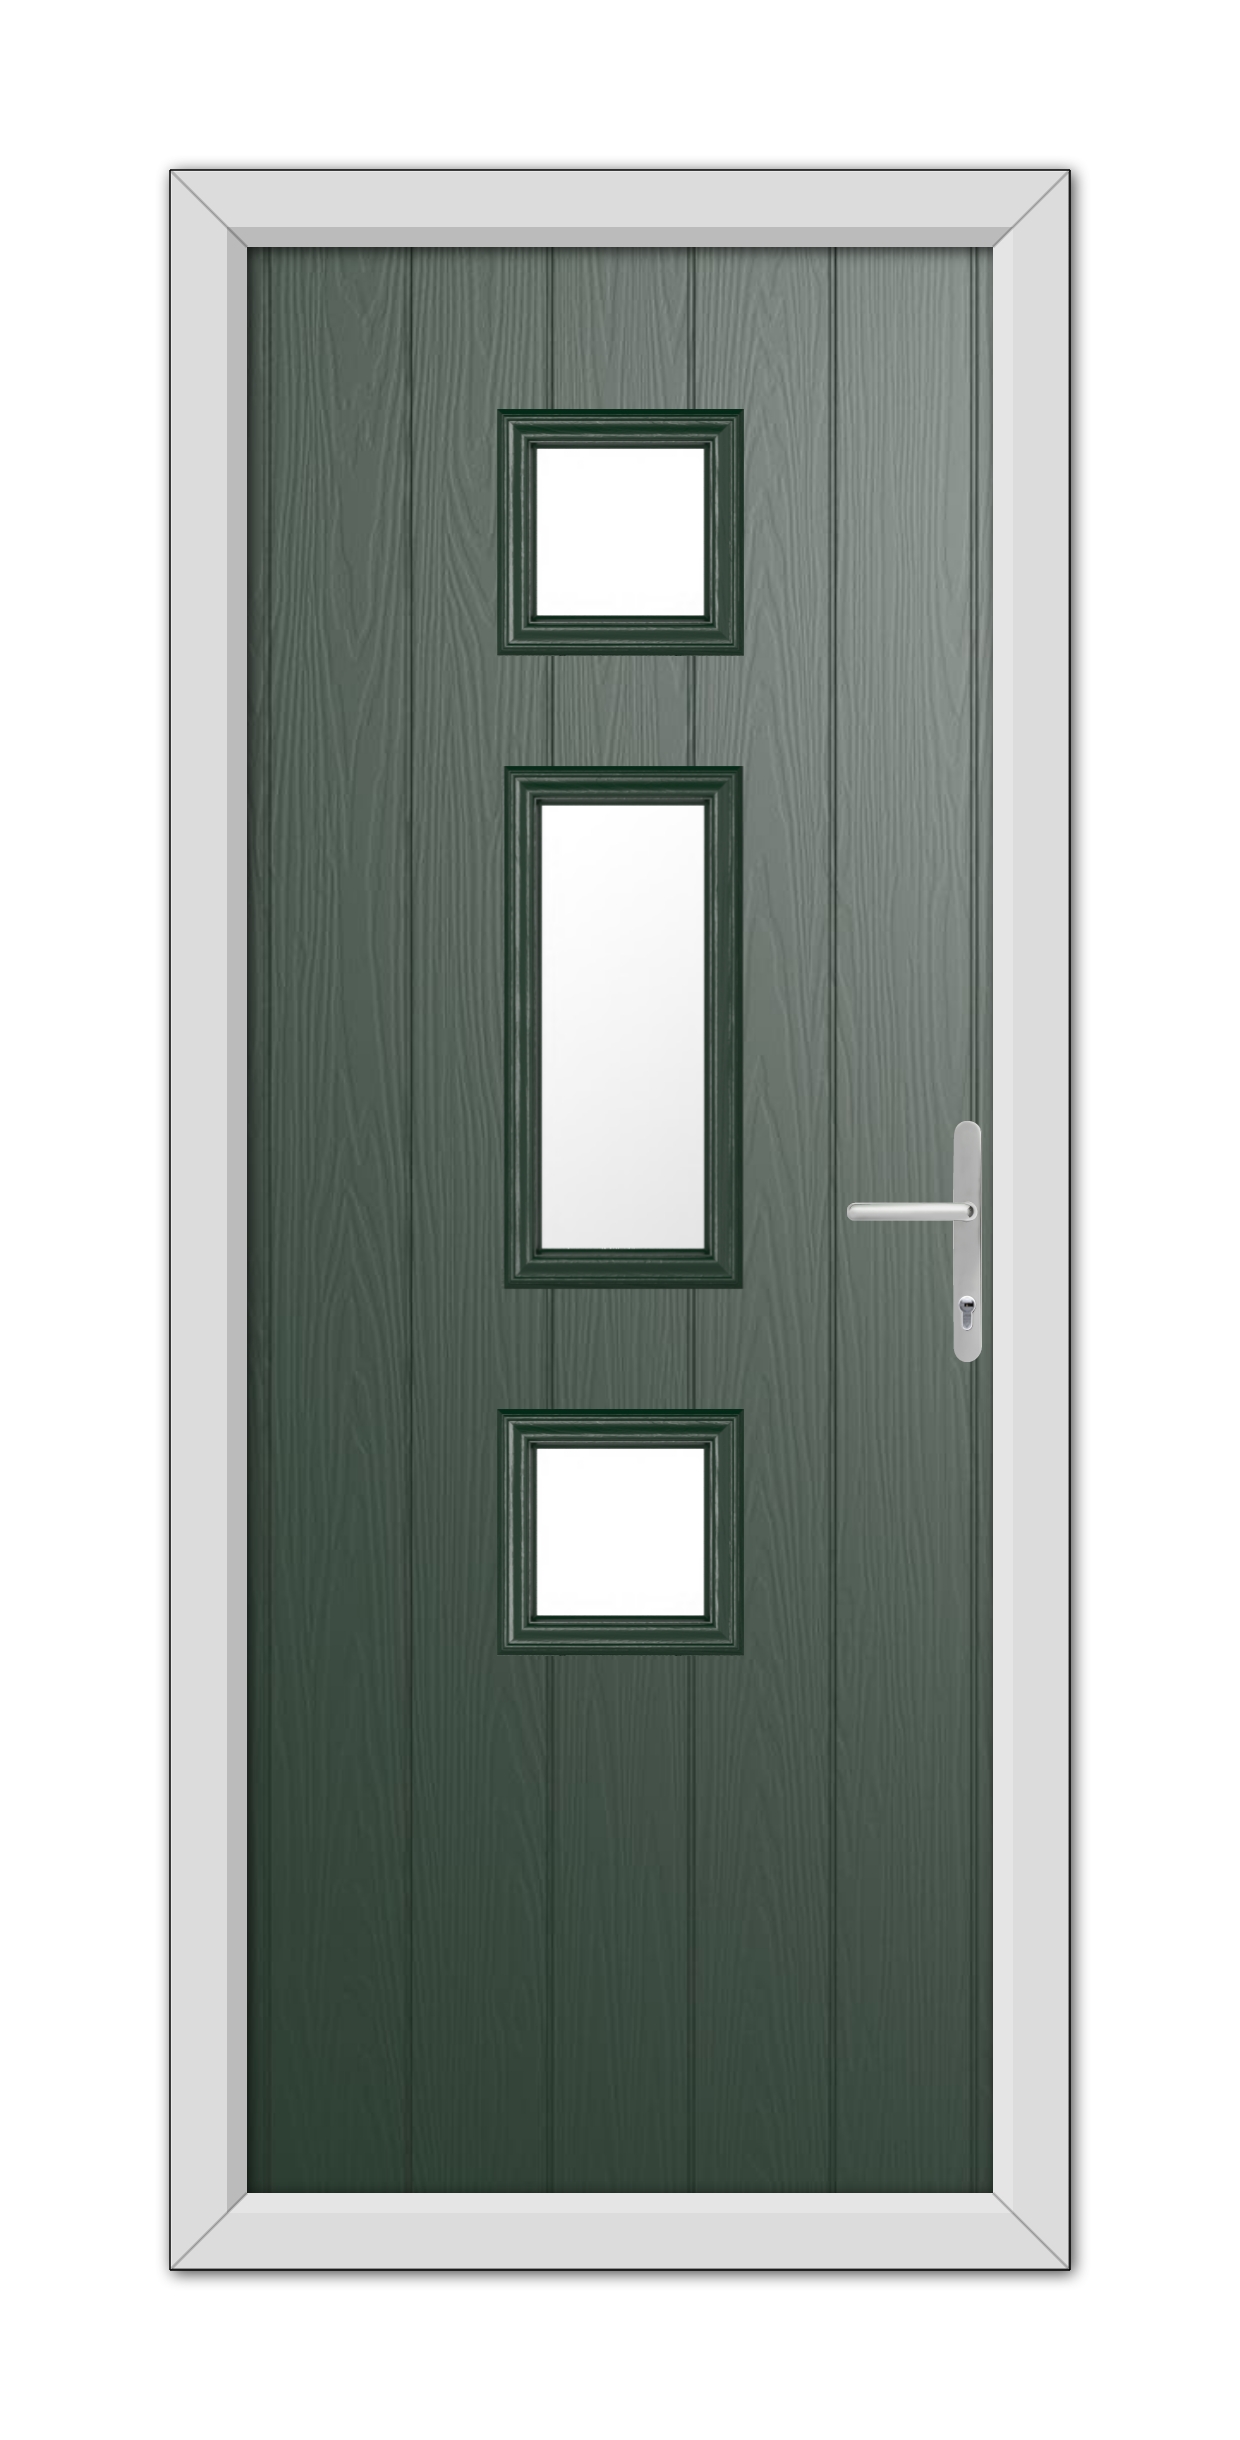 A modern Green York Composite Door 48mm Timber Core with three glass panels and a metal handle, set within a white frame.